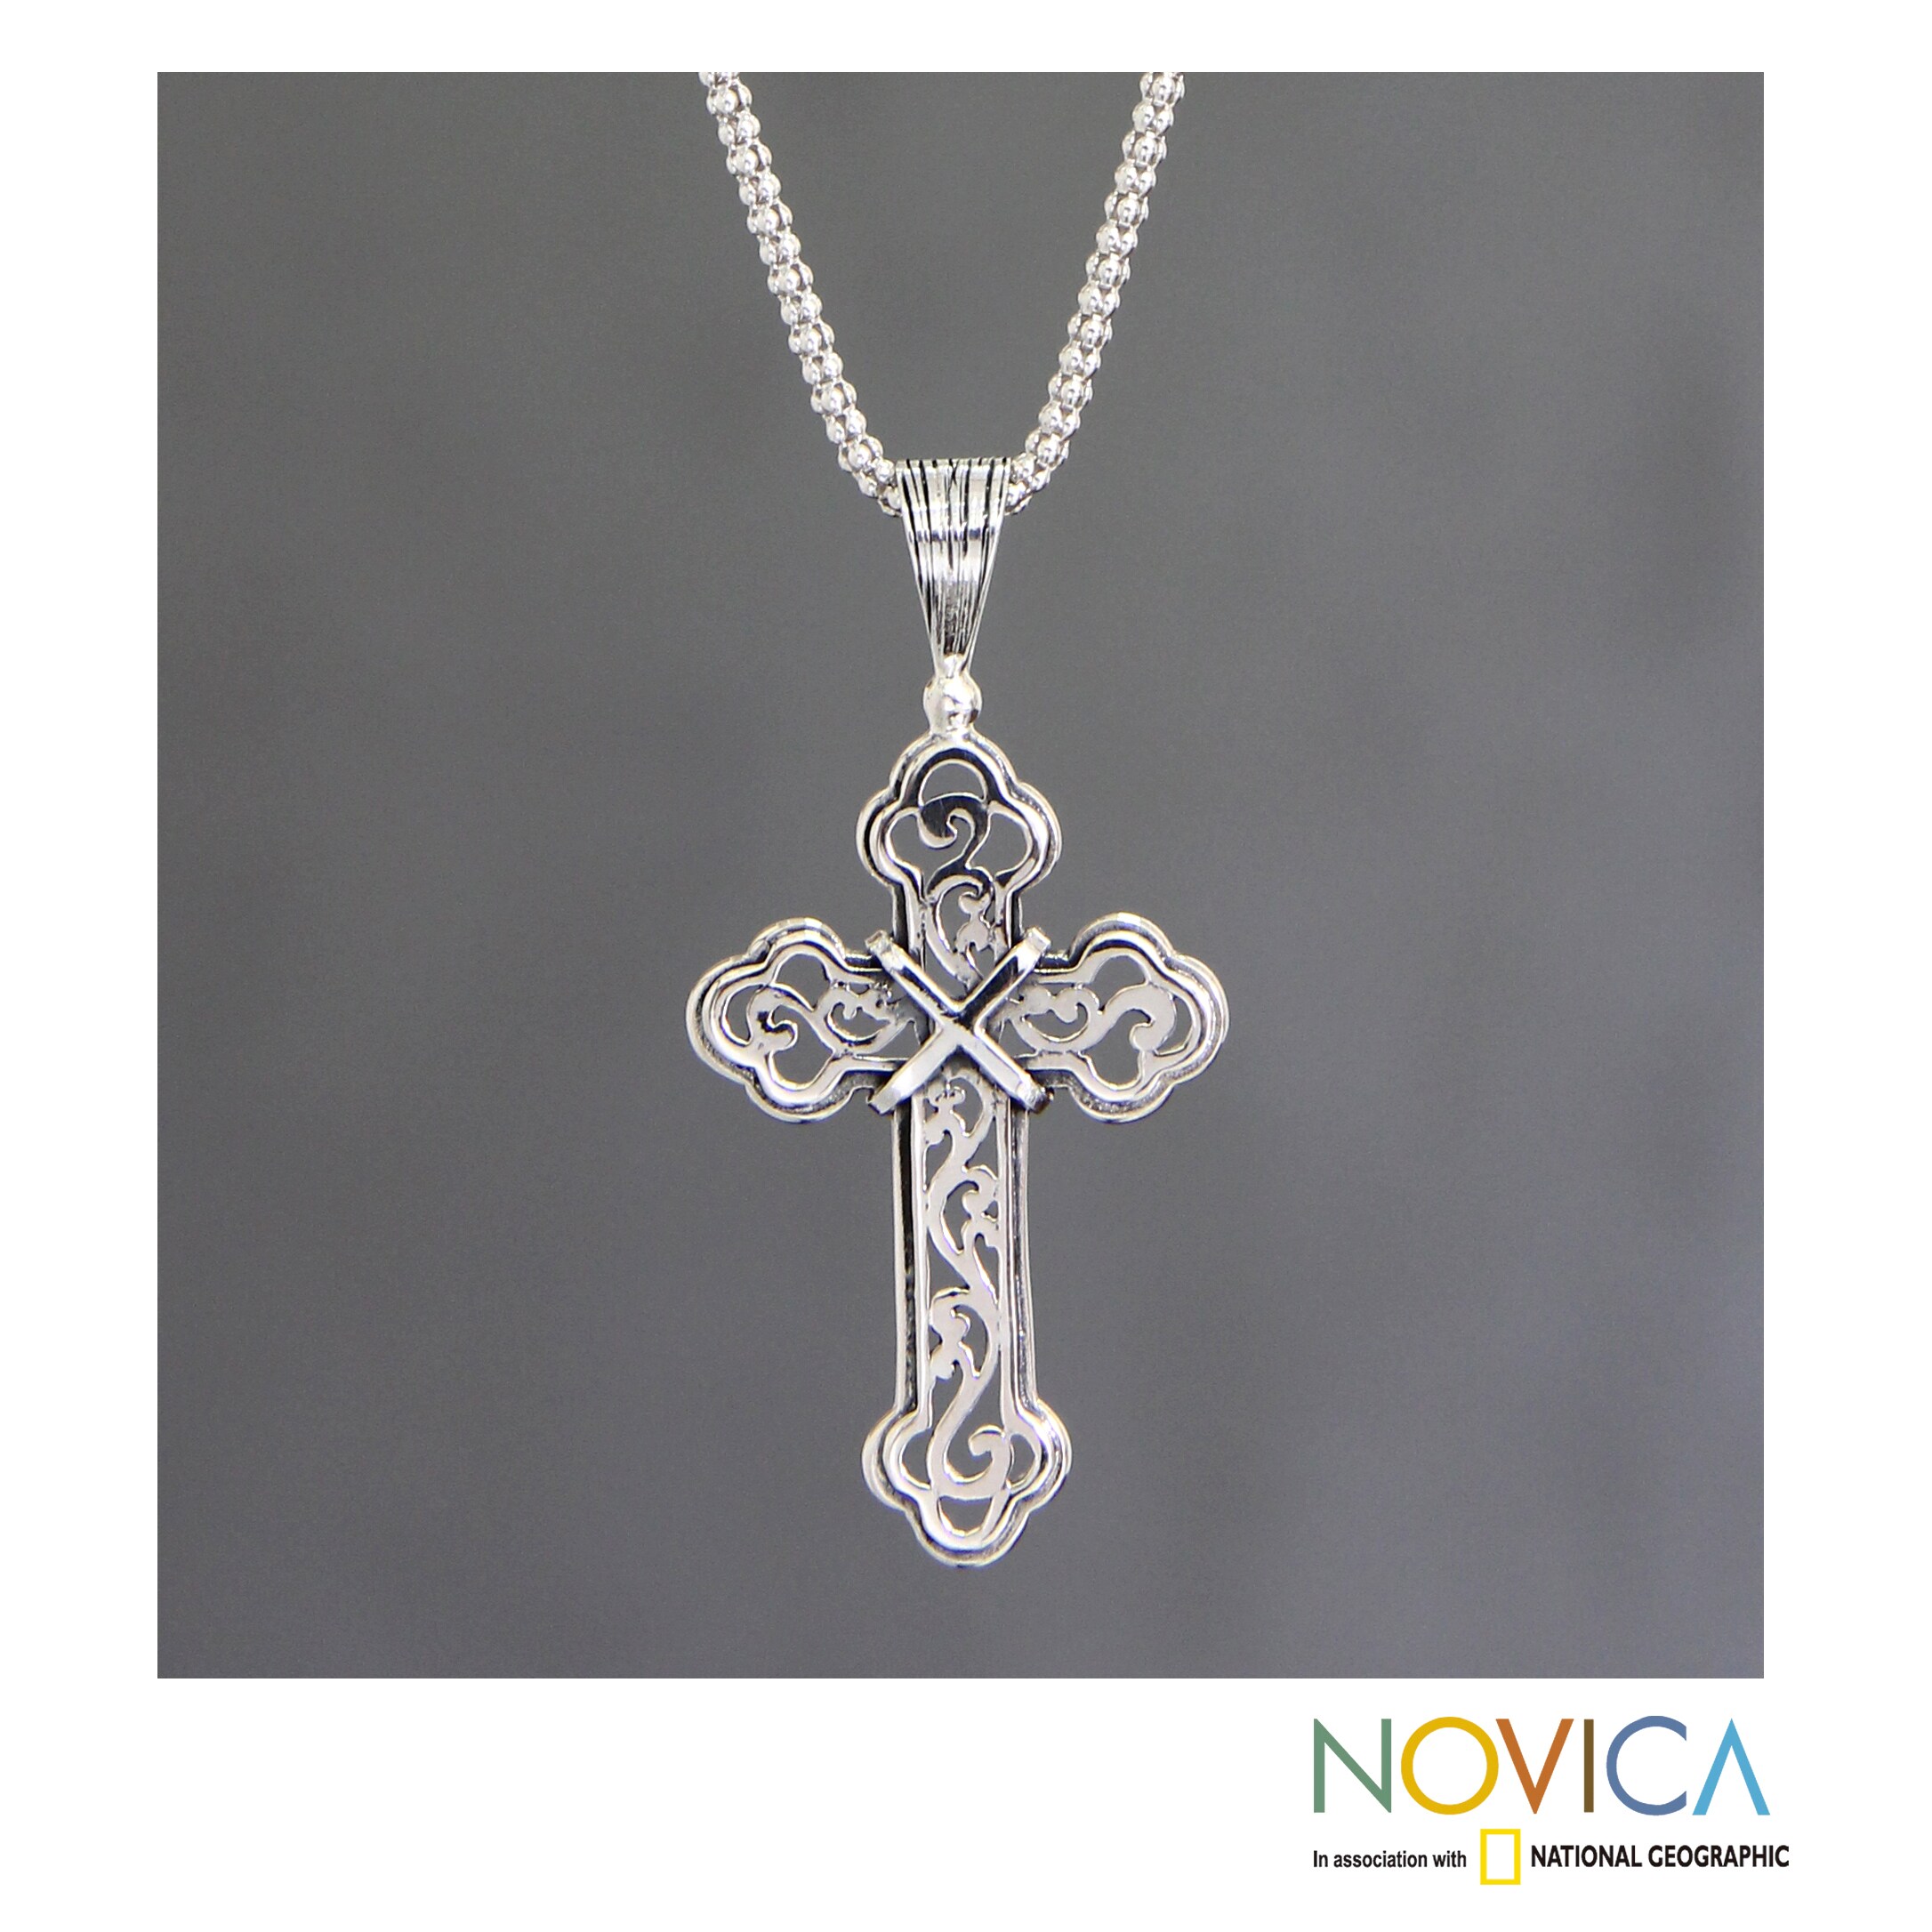  - Handcrafted-Sterling-Silver-Luminous-Faith-Cross-Necklace-Indonesia-L15384686